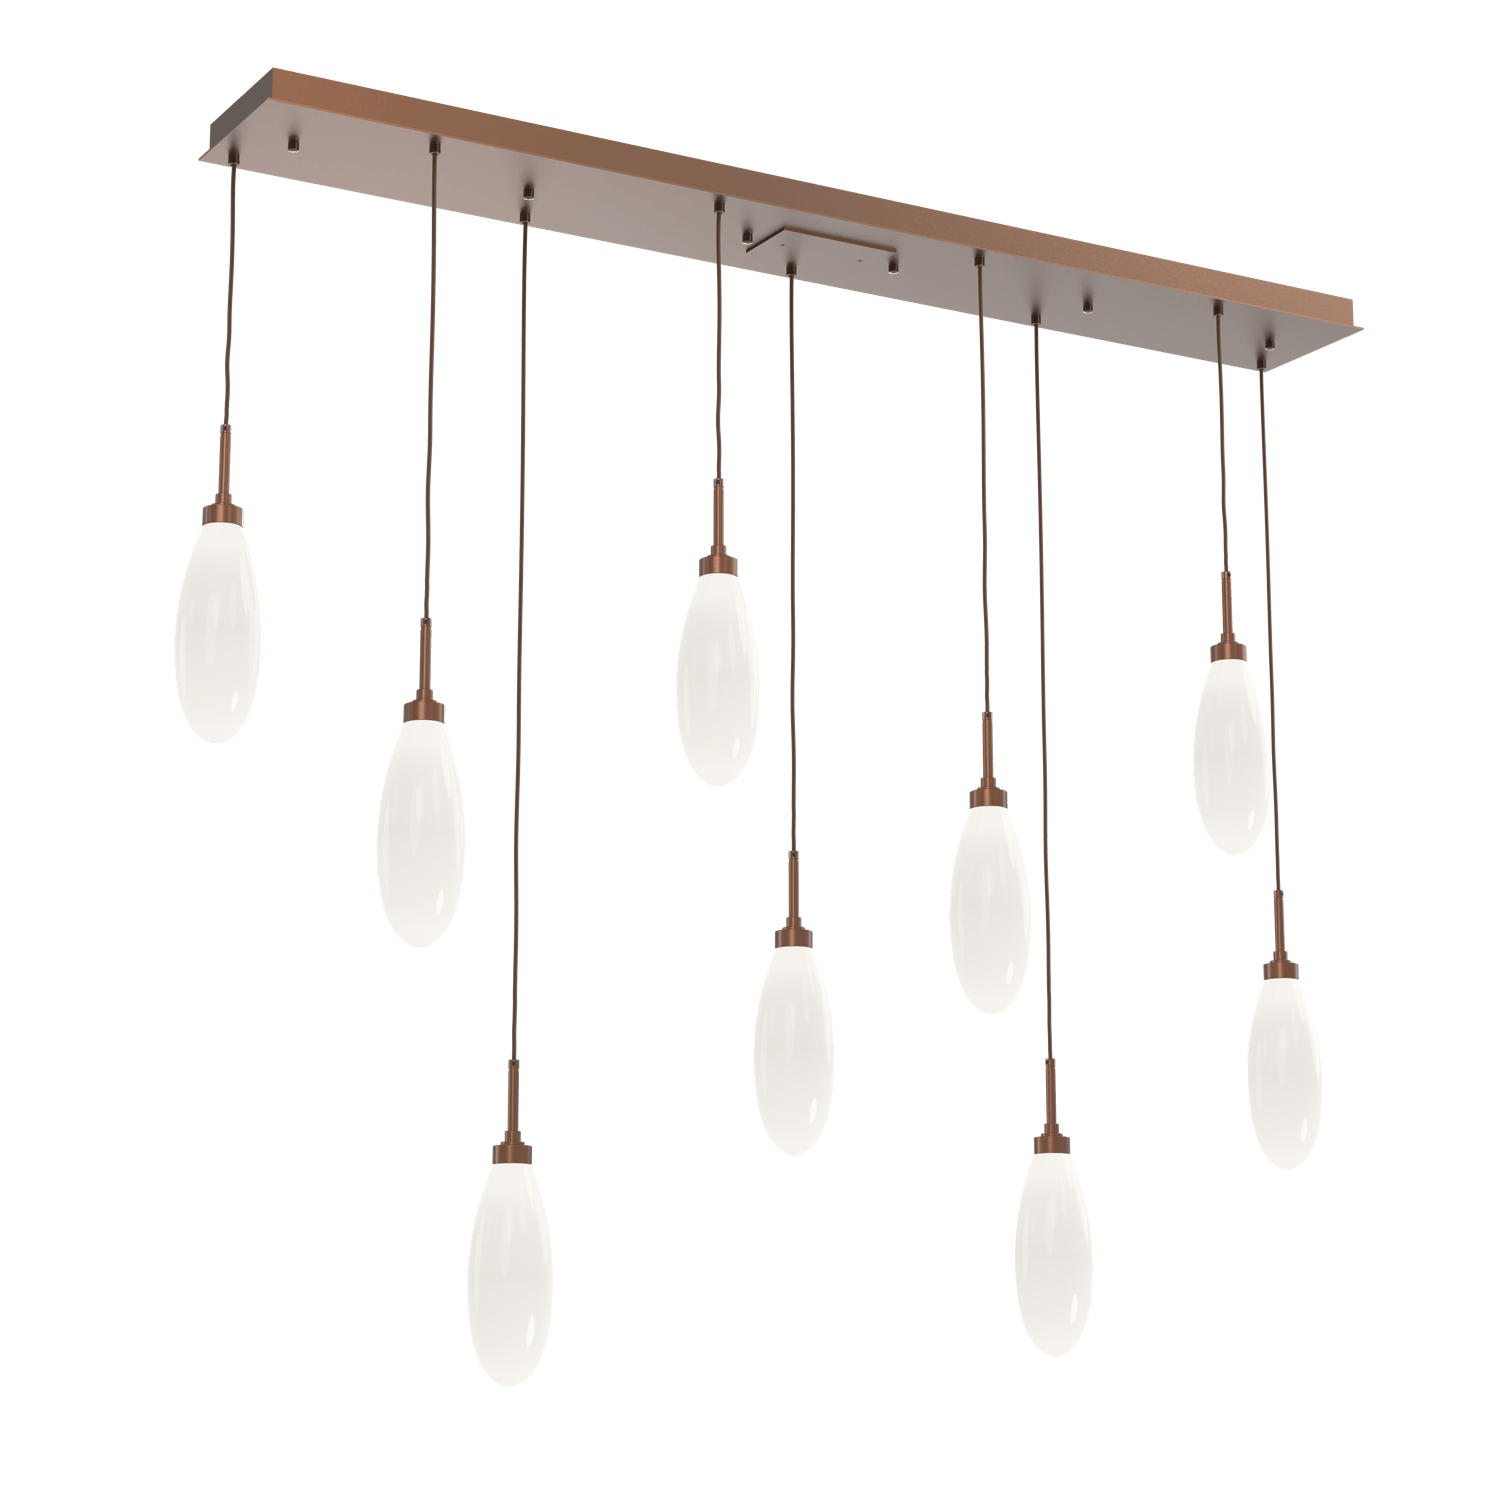 PLB0071-09-BB-WL-LL-Hammerton-Studio-Fiori-9-light-linear-pendant-chandelier-with-burnished-bronze-finish-and-opal-white-glass-shades-and-LED-lamping